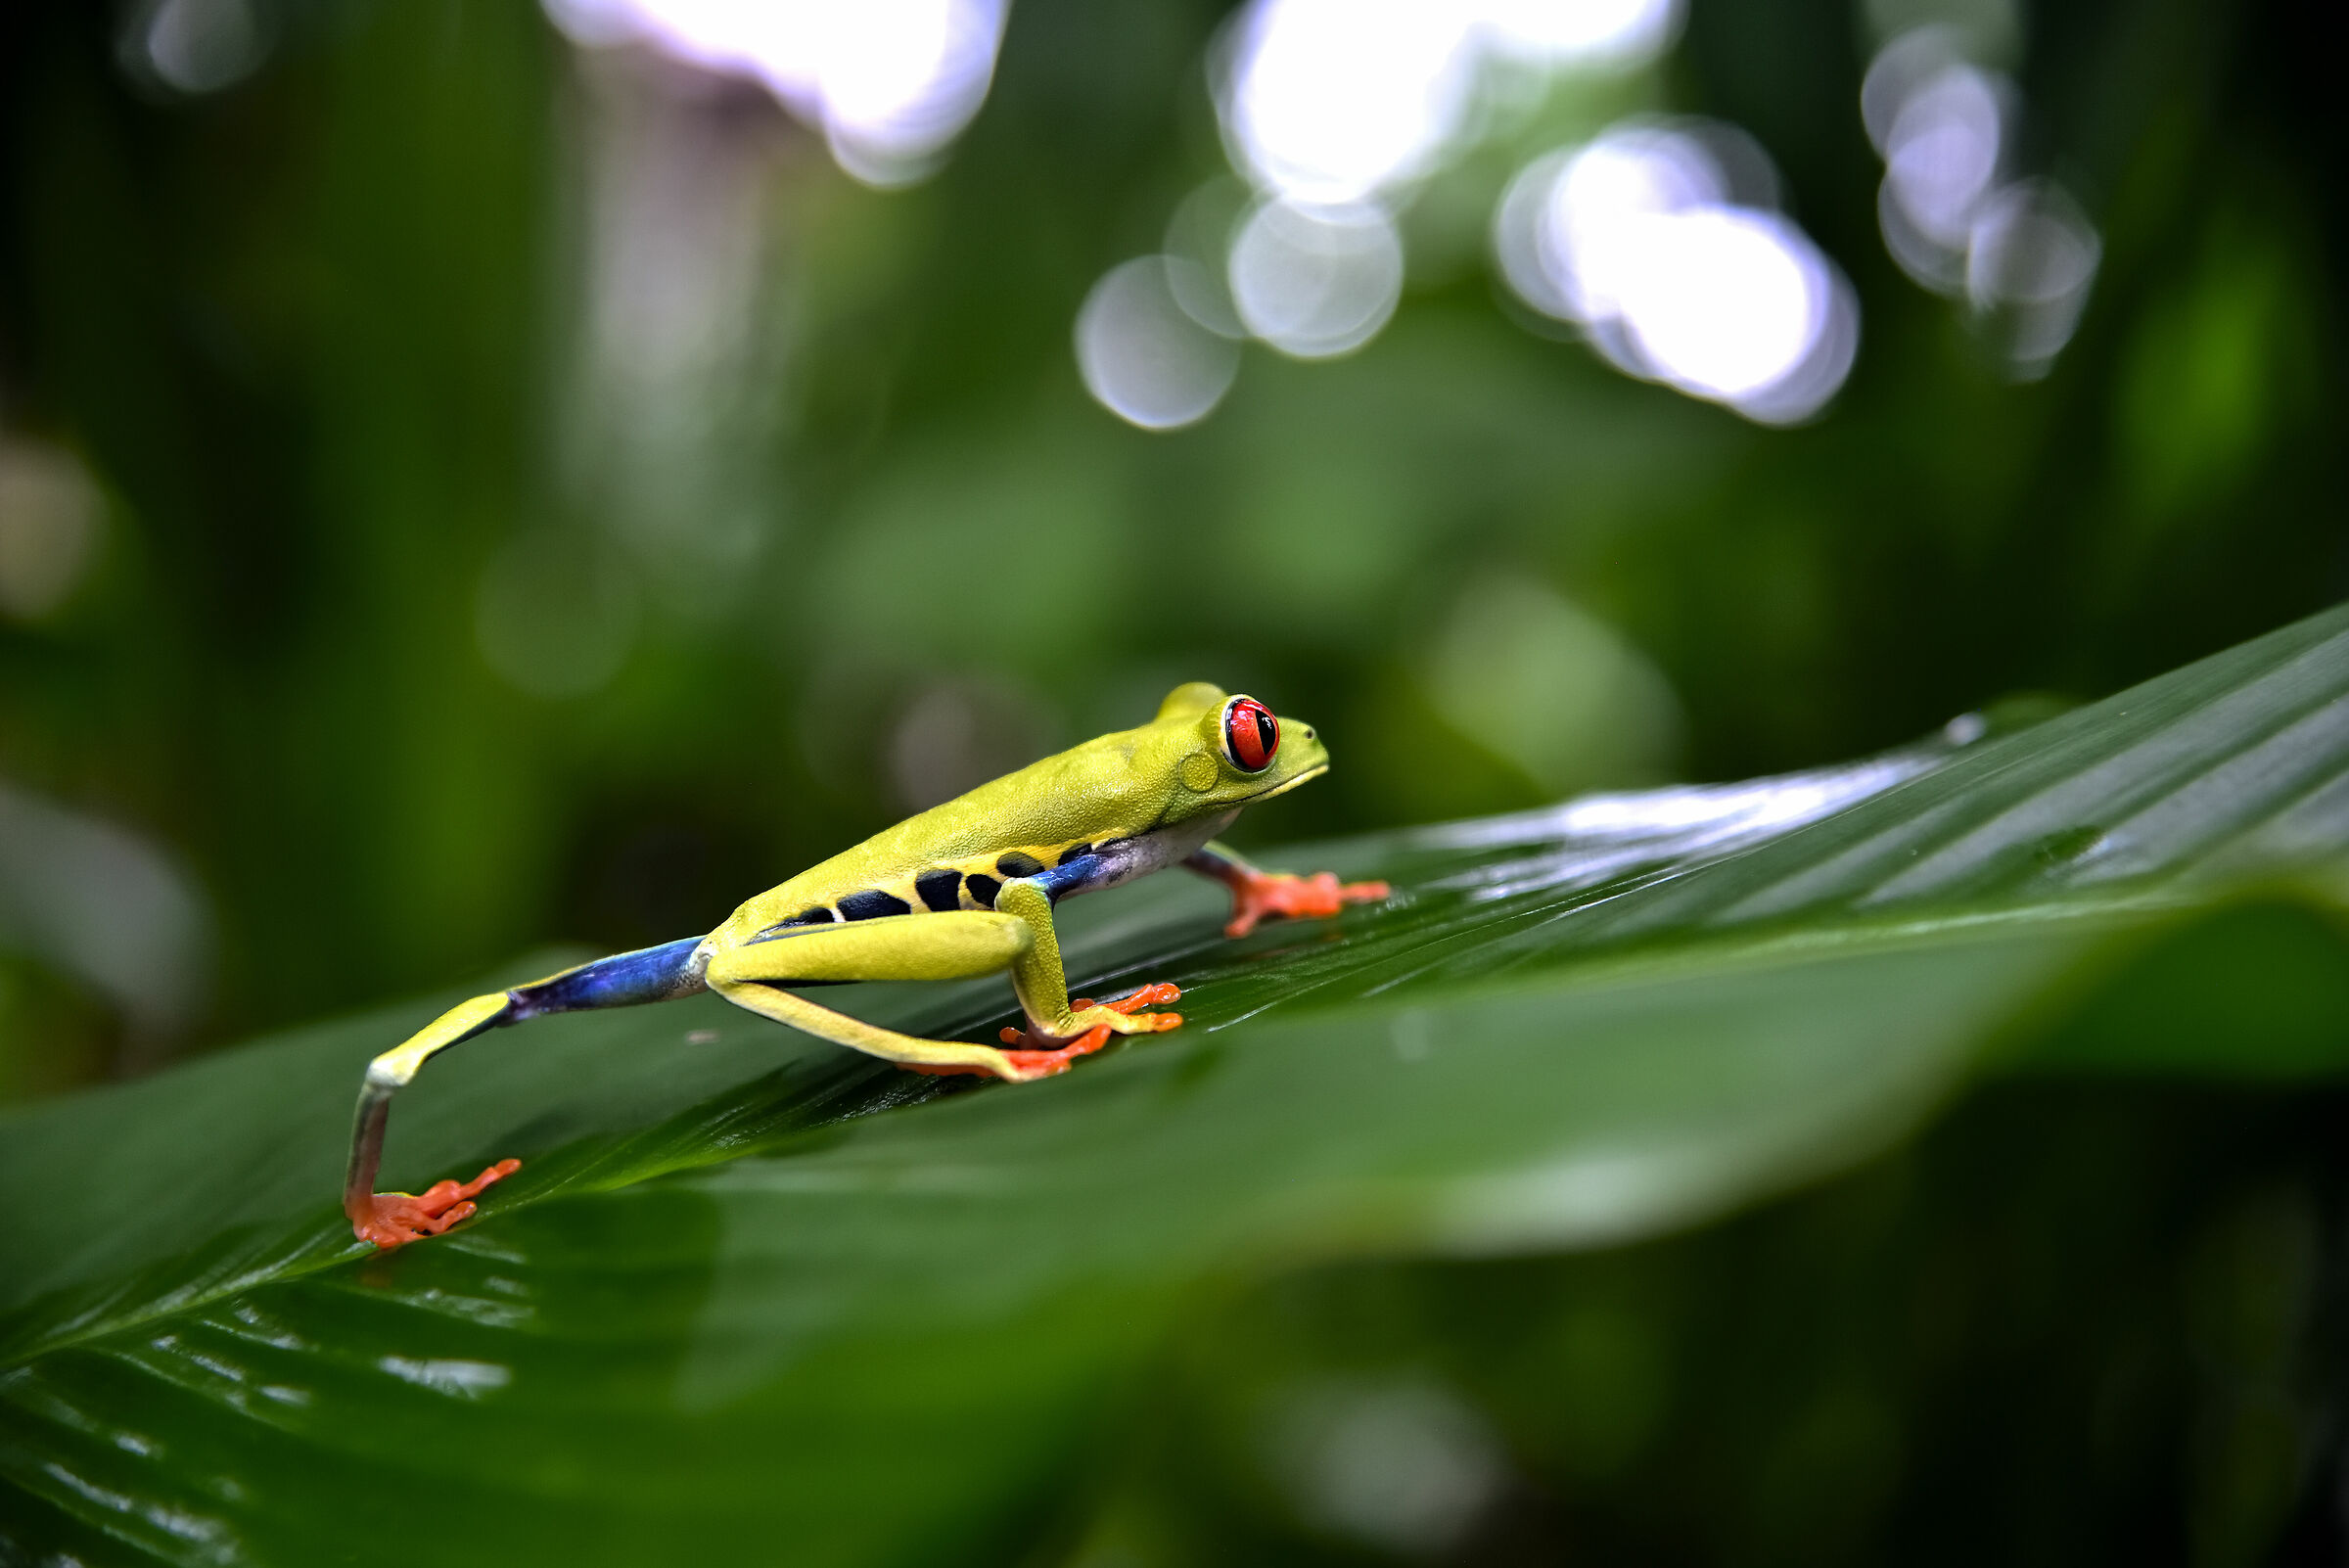 A beautiful red eye three frog moves on the leaf...